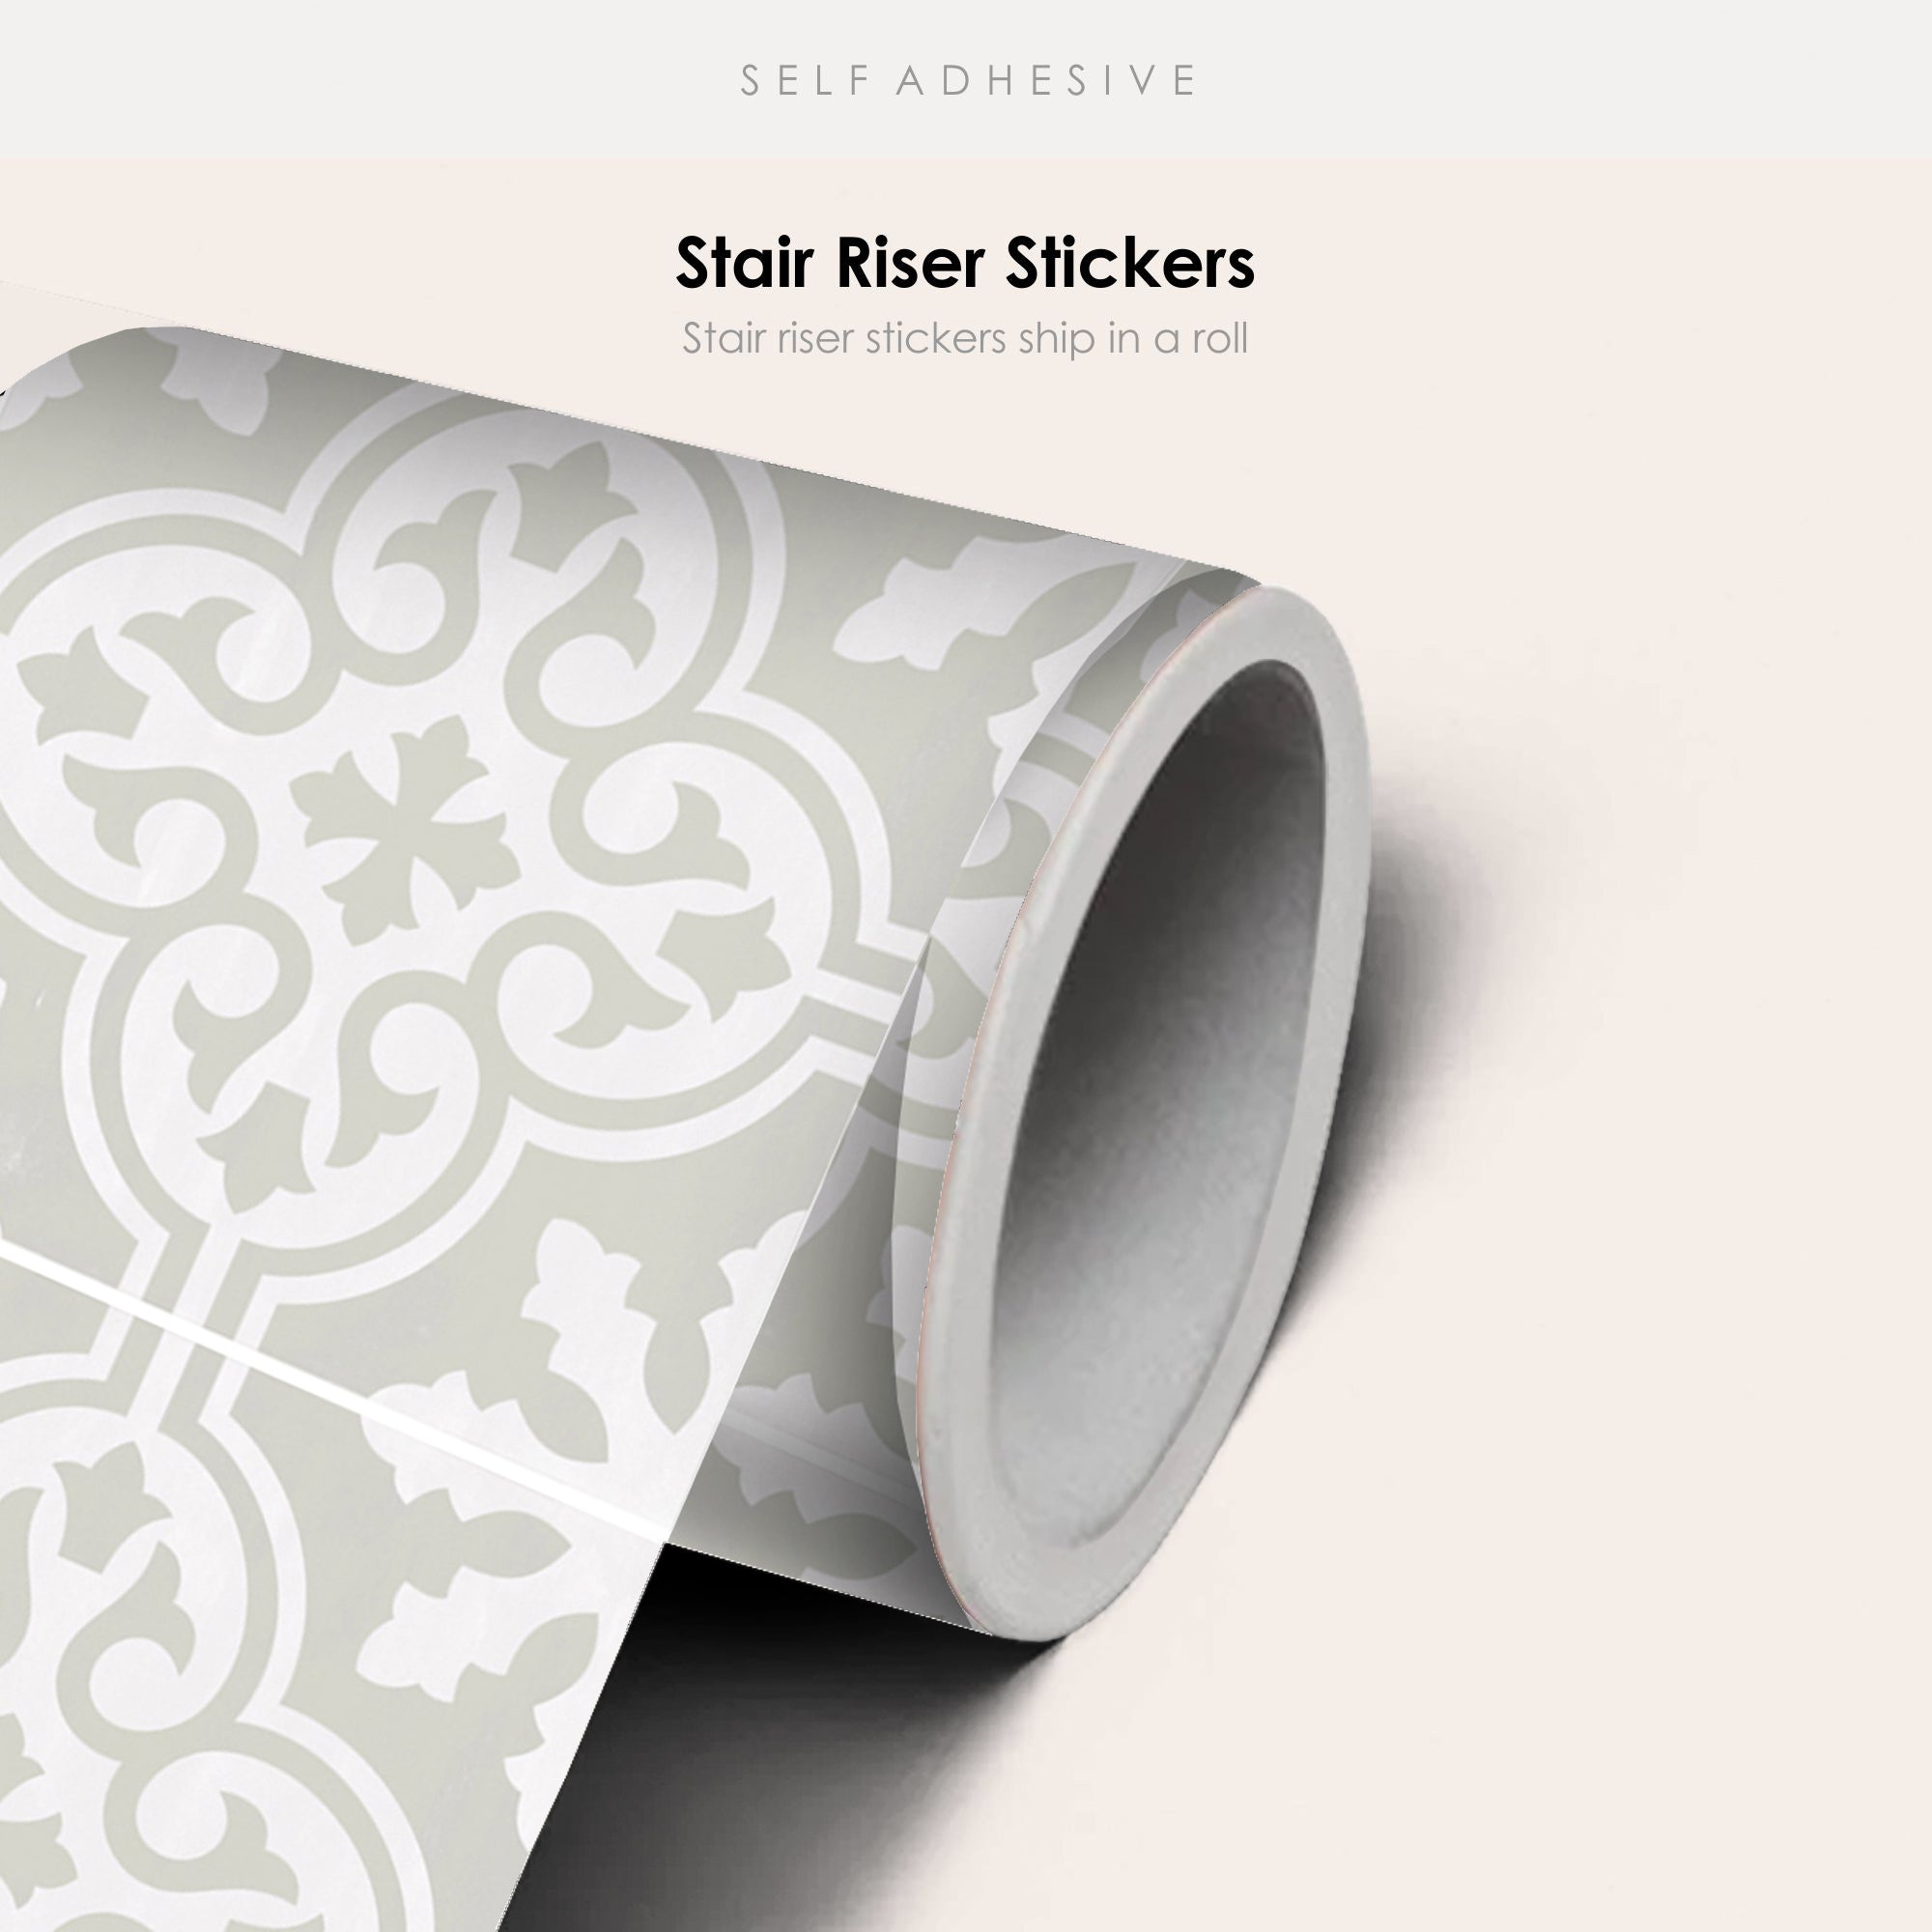 Floc in Silver Stair Riser Stickers